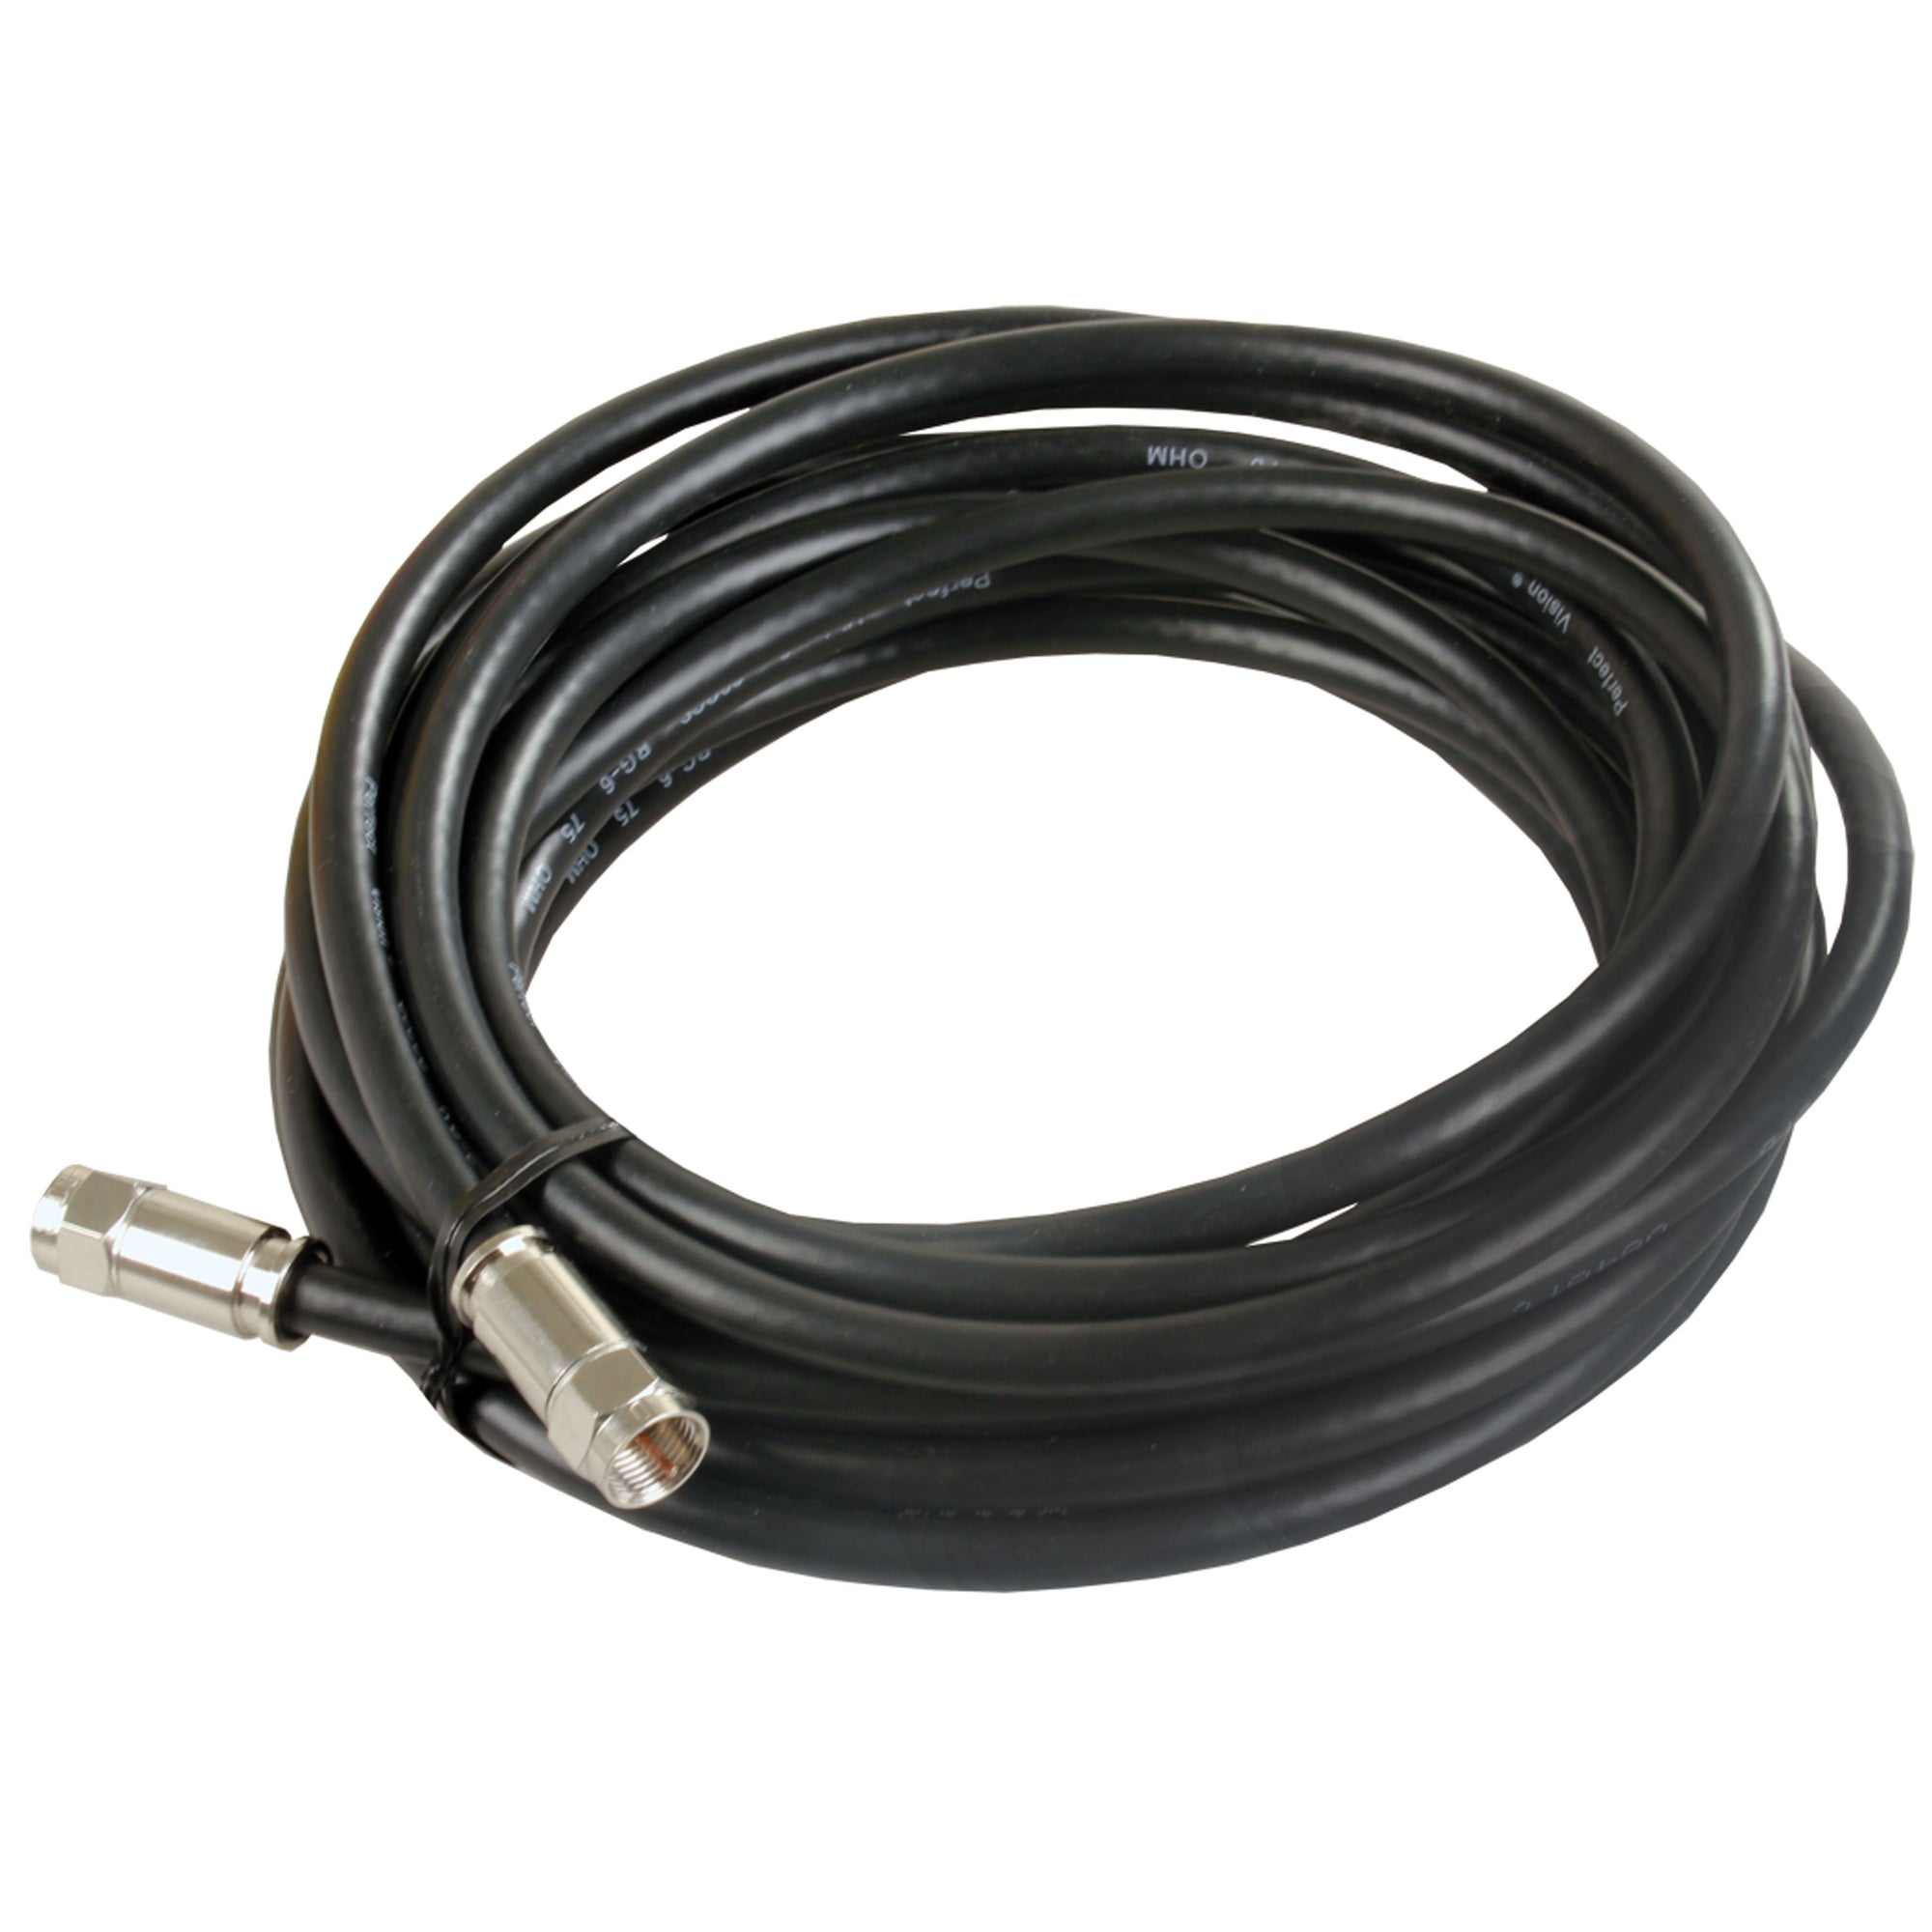 JR Products 47975 RG6 Exterior HD/Satellite Cable - 20'